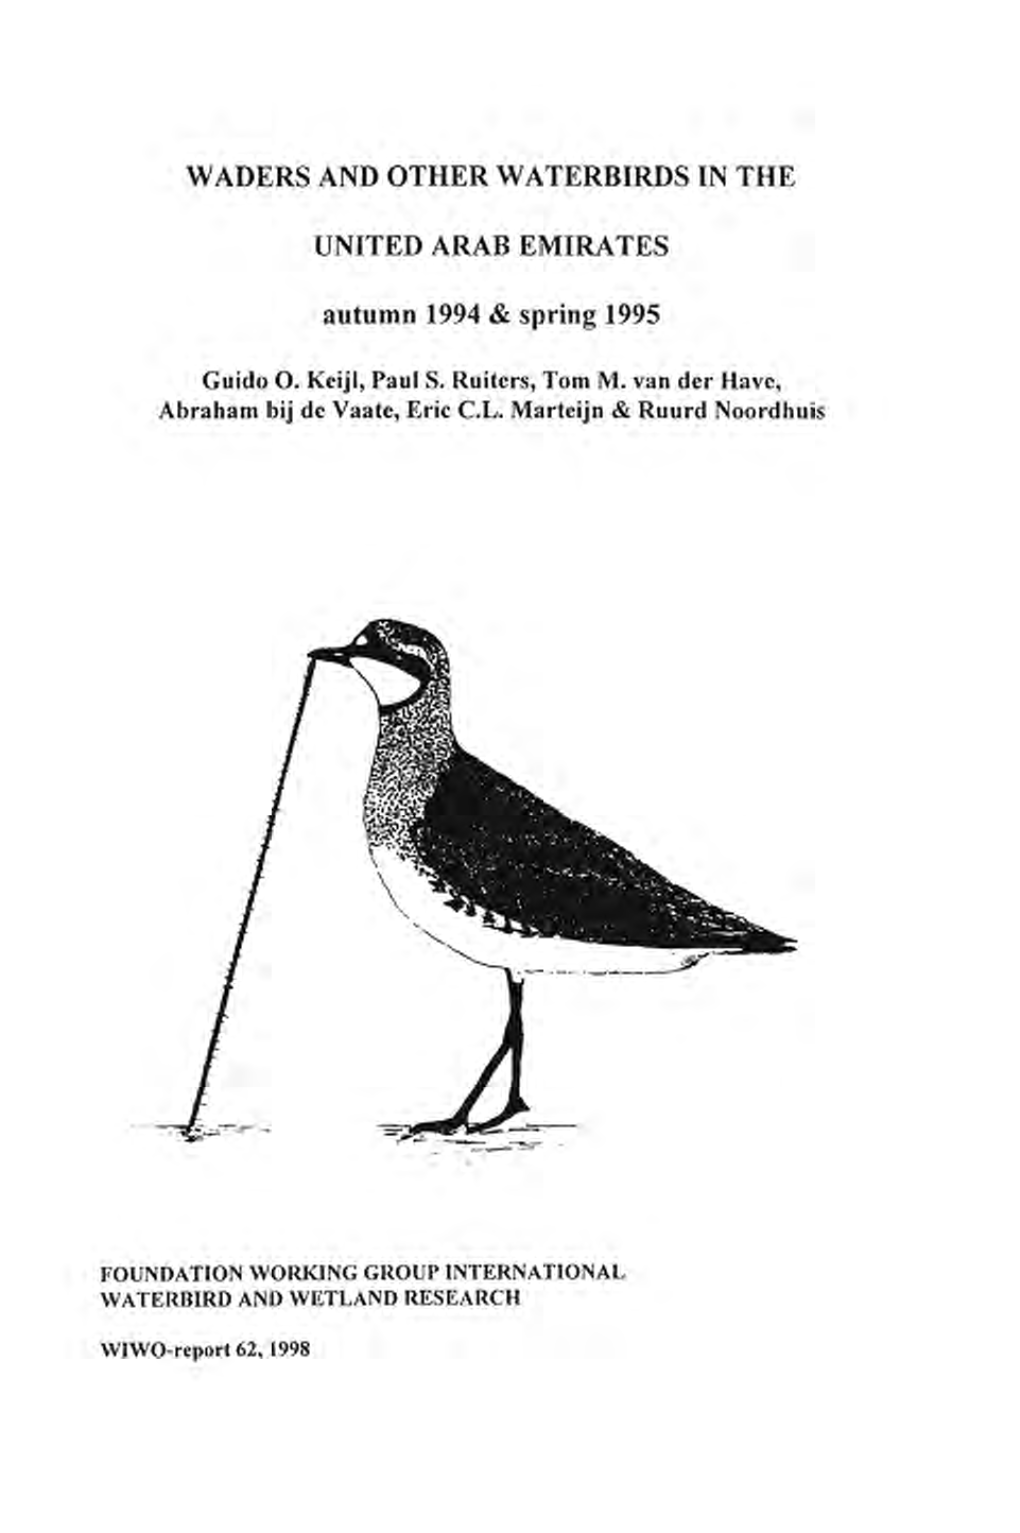 Waders and Other Waterbirds in the UAE Autumn 1994 & Spring 1995